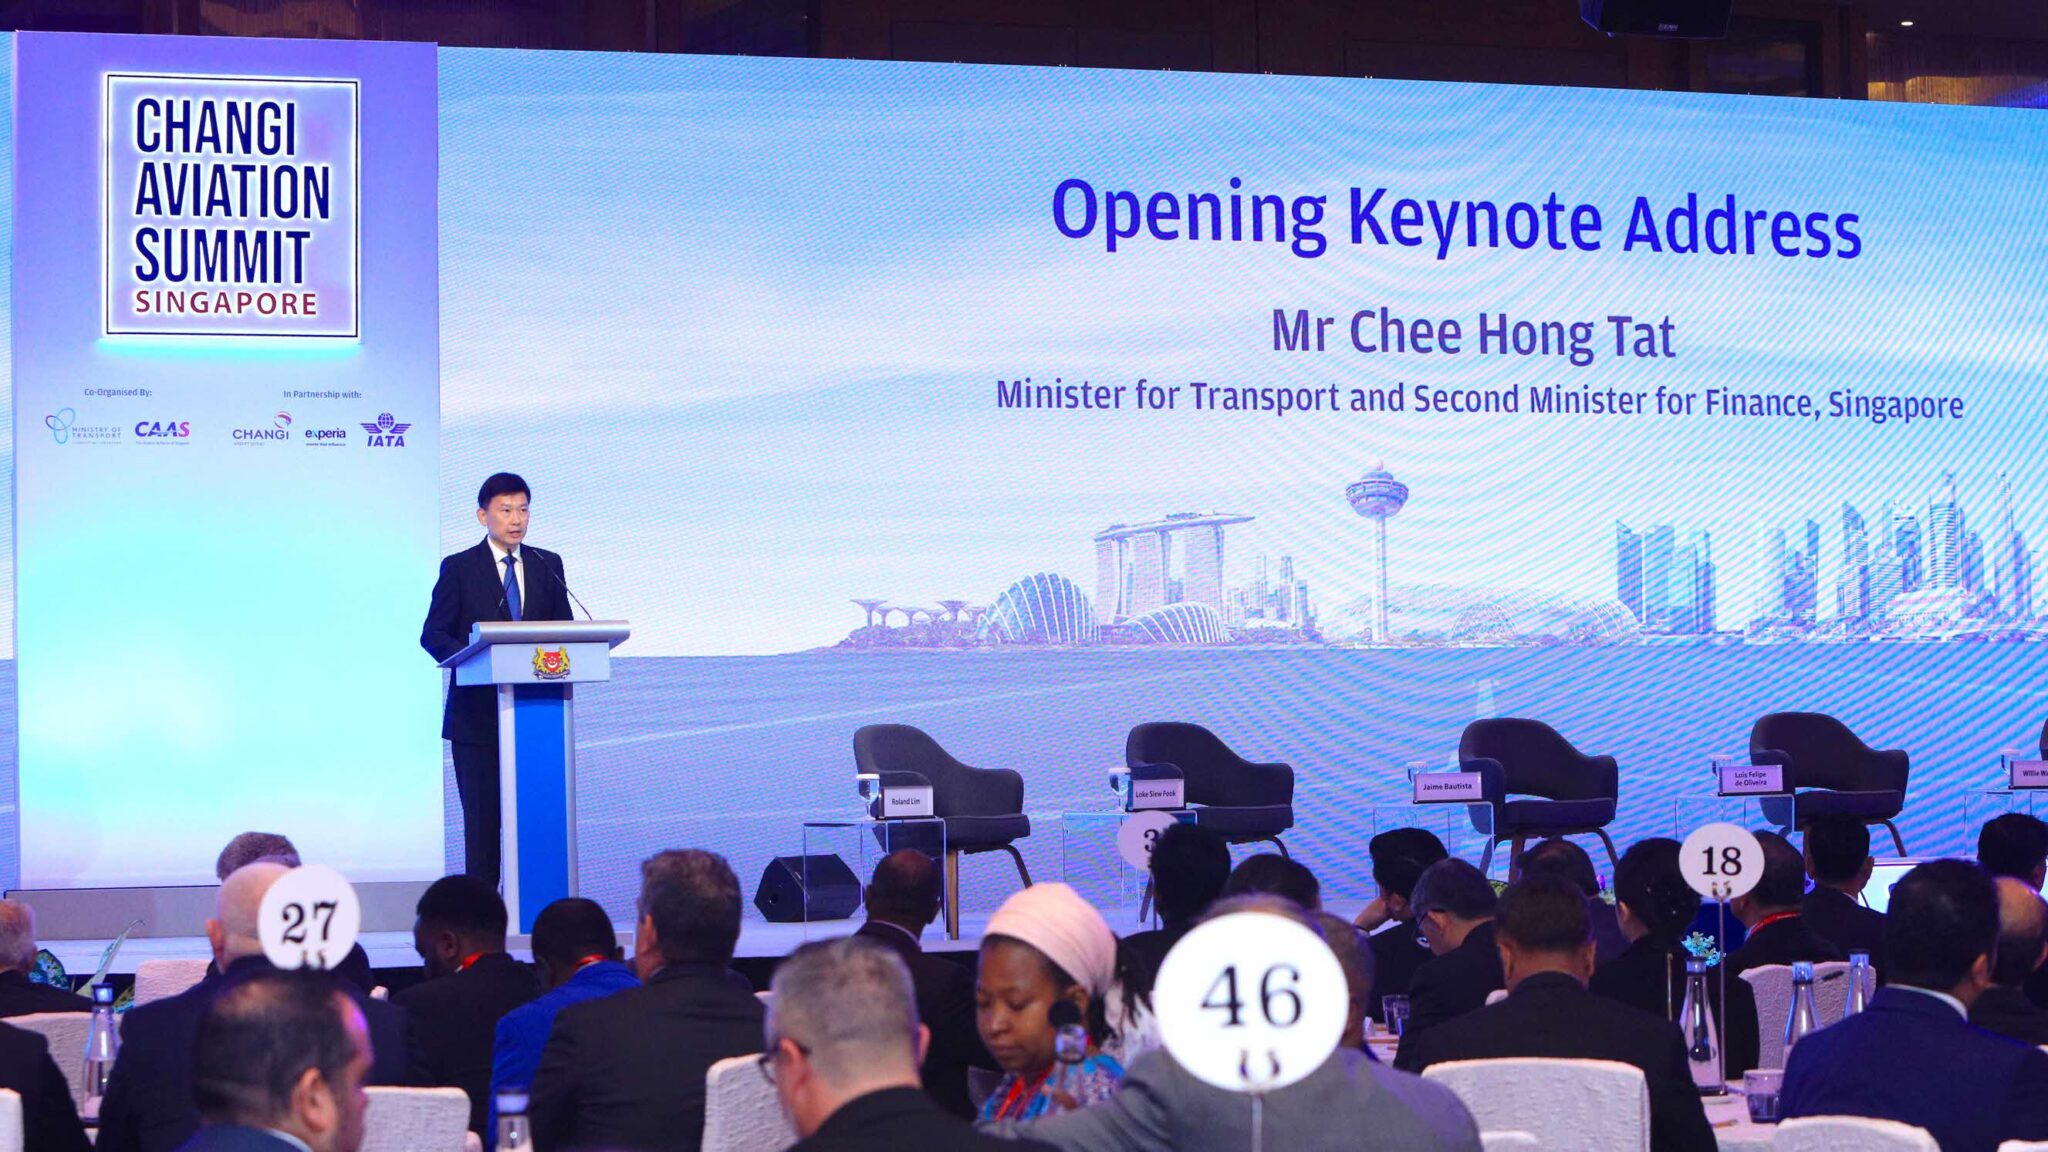 Singapore Minister for Transport and Second Minister for Finance, Mr Chee Hong Tat announced the launch of the Singapore Sustainable Air Hub Blueprint at the 2nd Changi Aviation Summit today